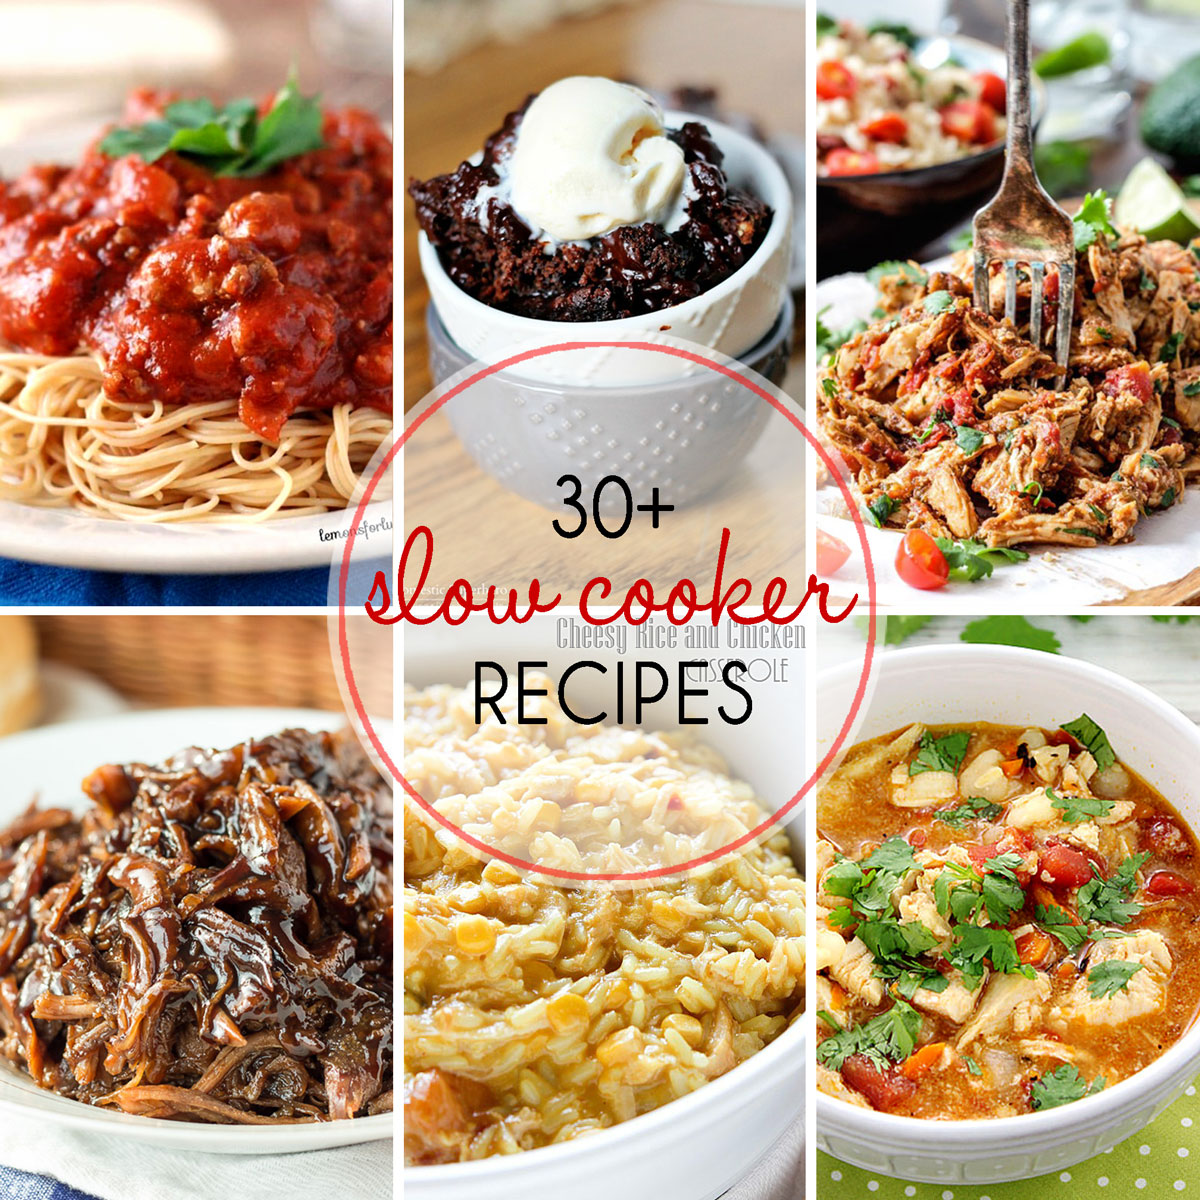 Ready to start using that slow cooker that's hiding in your cabinet? Here's Over 30 Easy Slow Cooker Recipes for you to enjoy over and over!